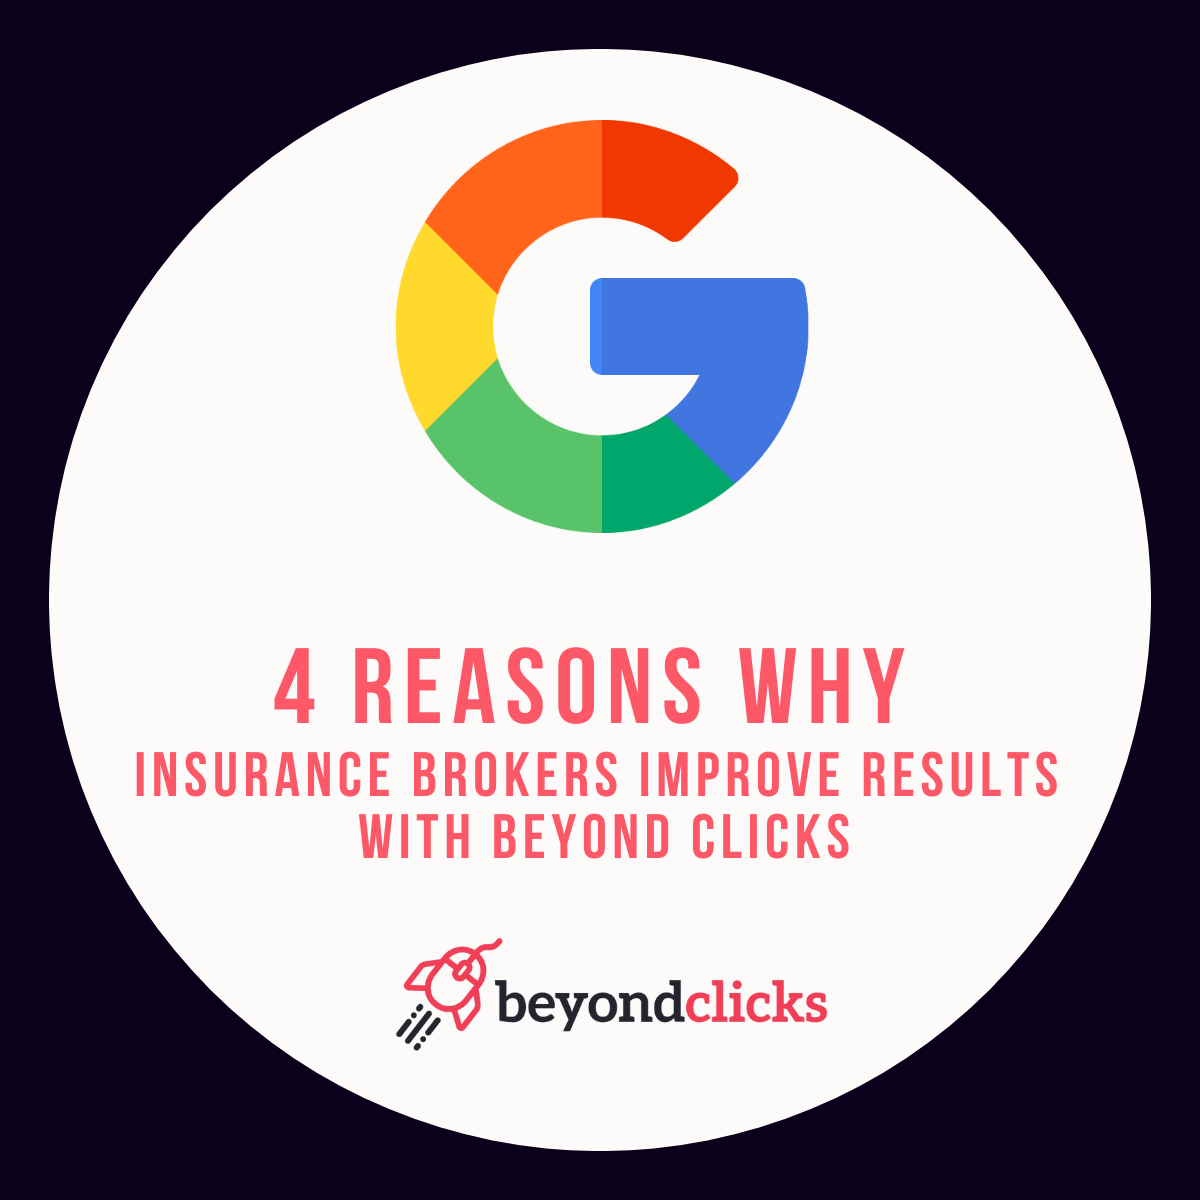 4 Reasons Why Beyond Clicks Improve Insurance Broker Results